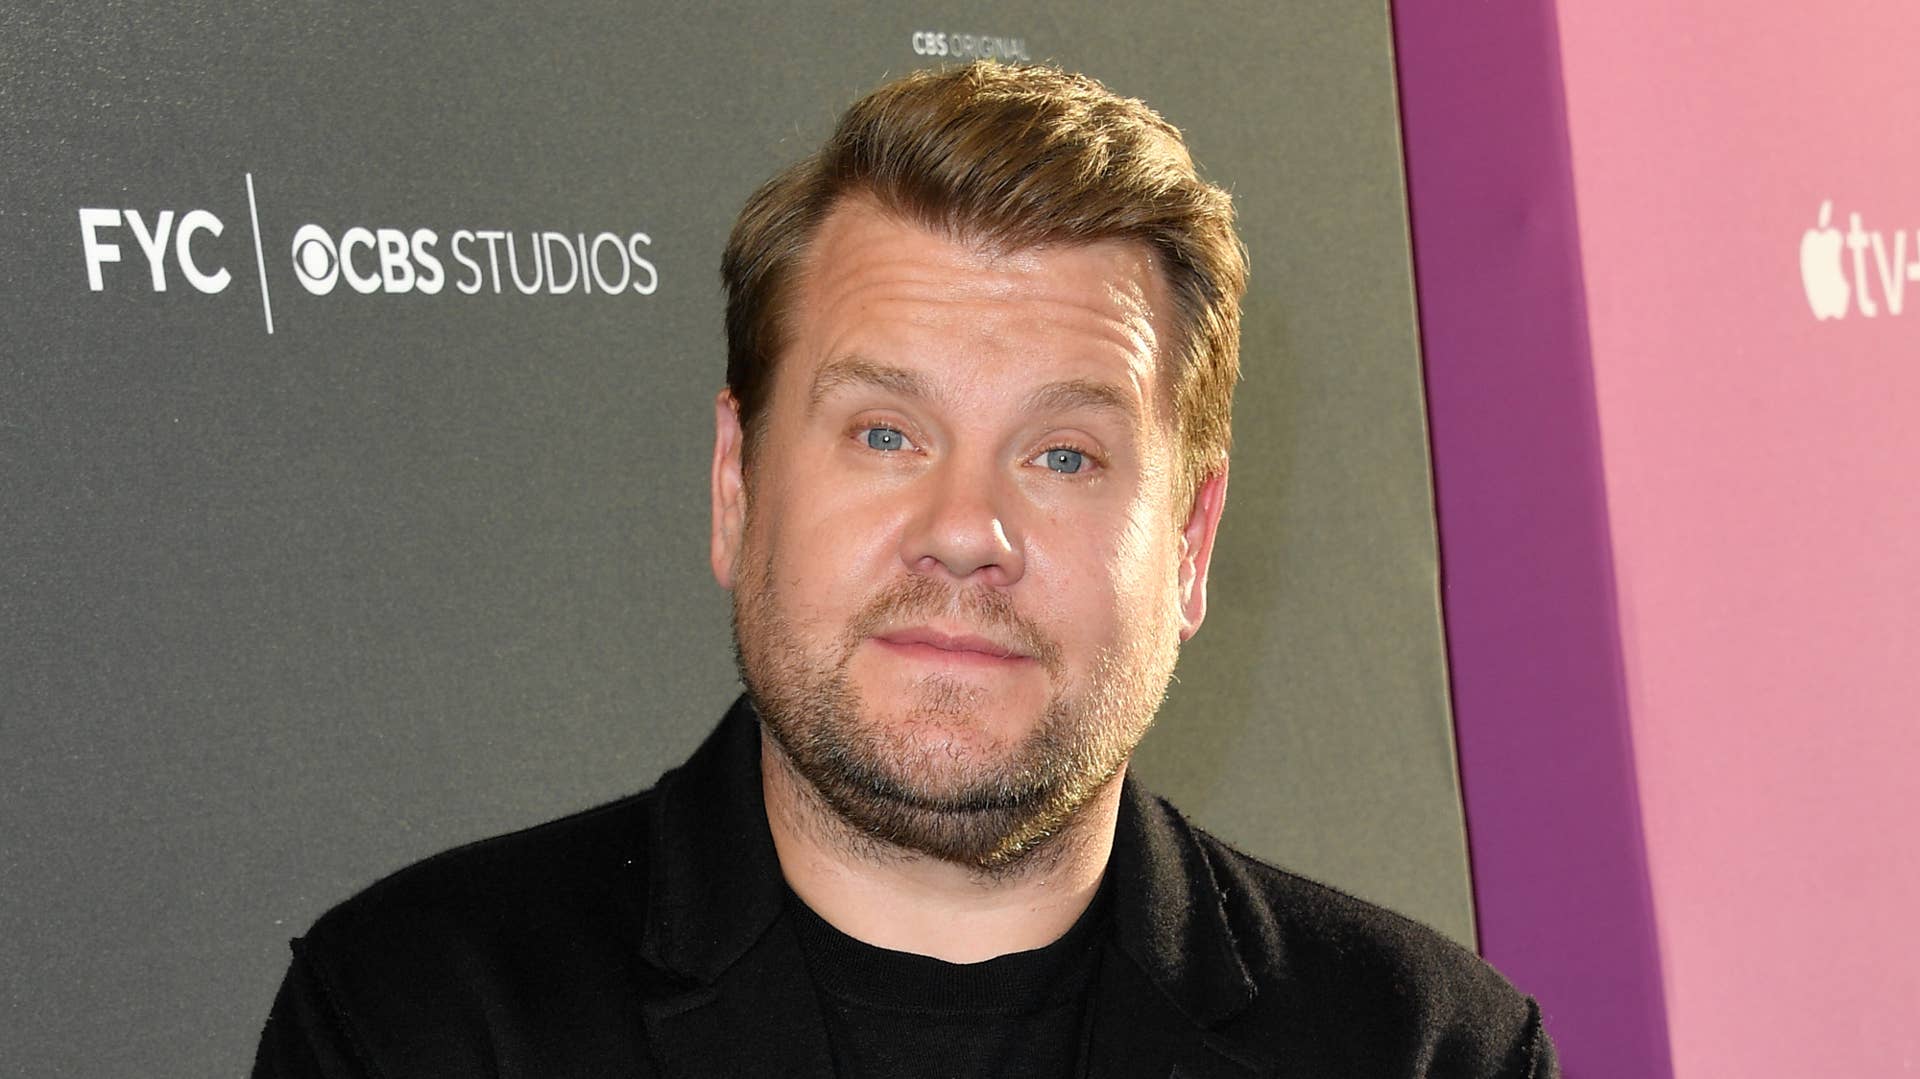 James Corden photographed during an FYC event.